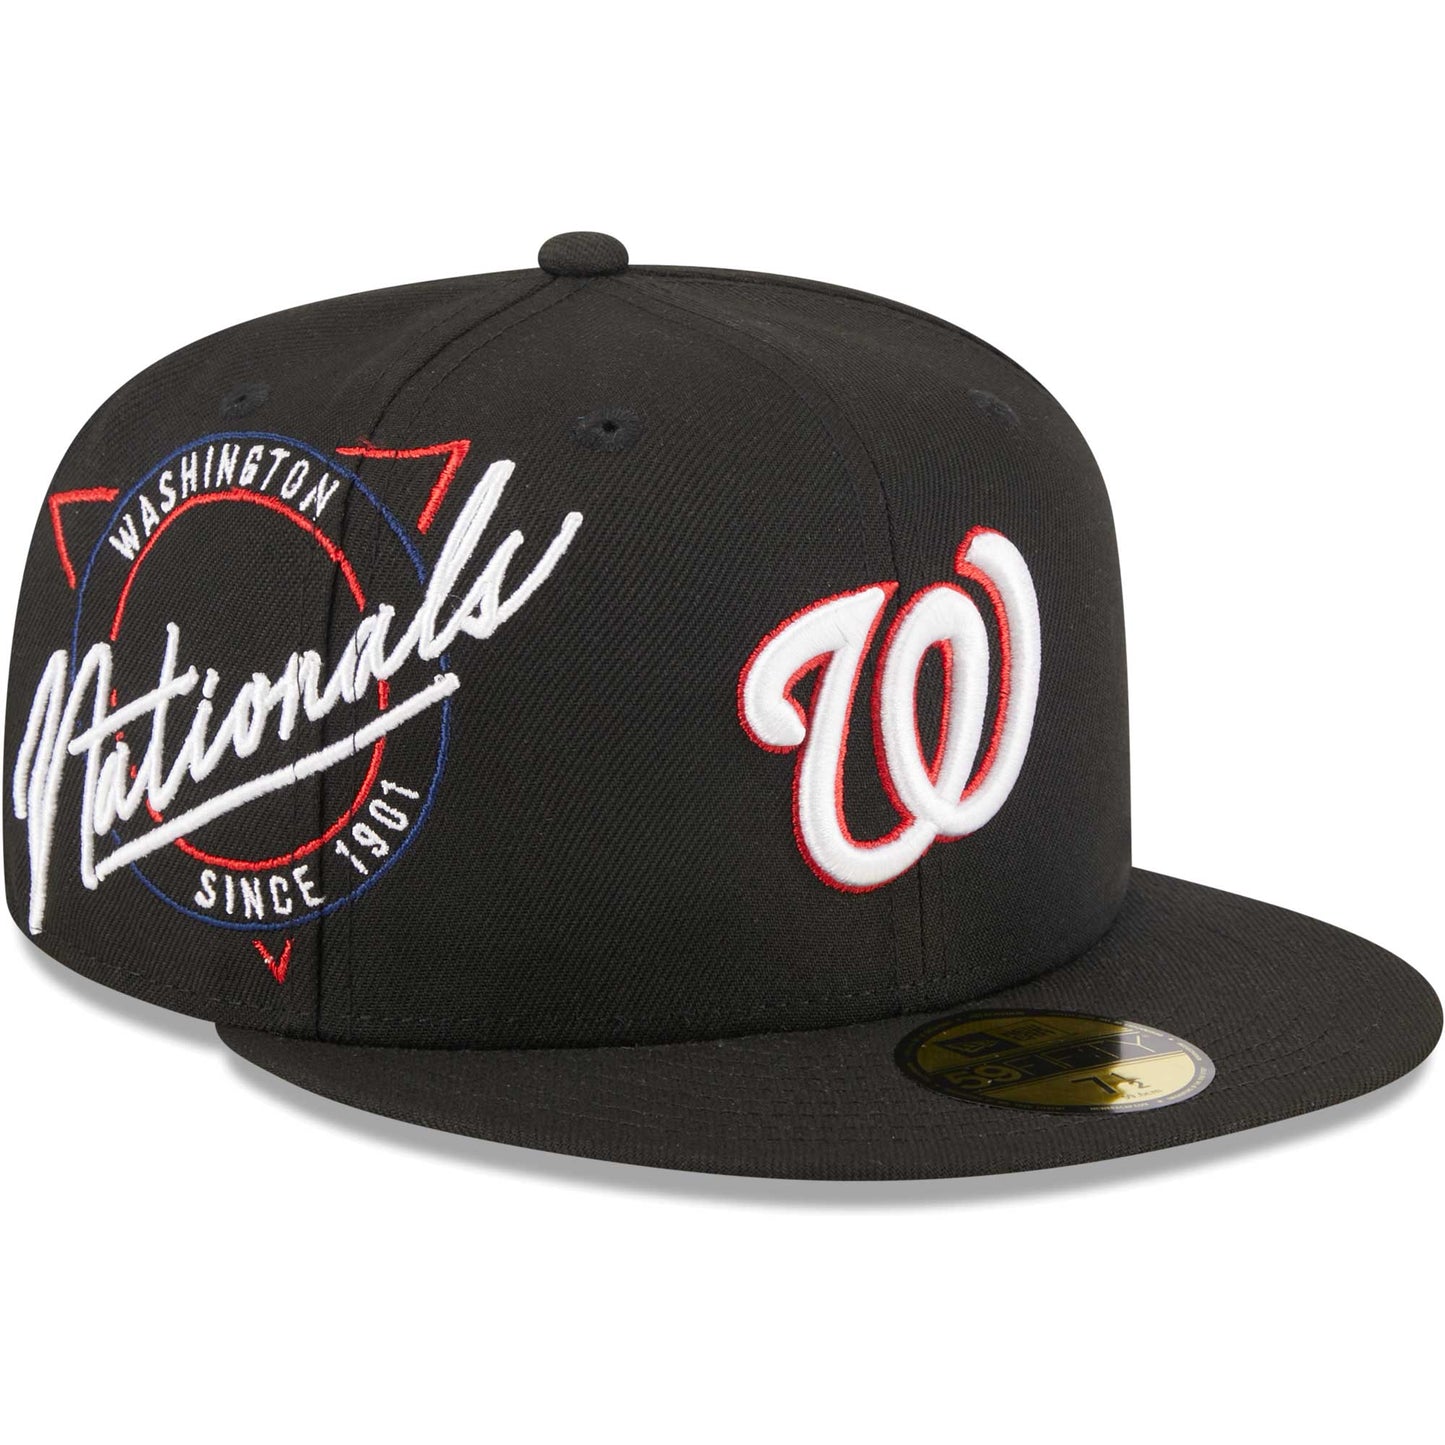 Washington Nationals New Era Neon 59FIFTY Fitted Hat - Black